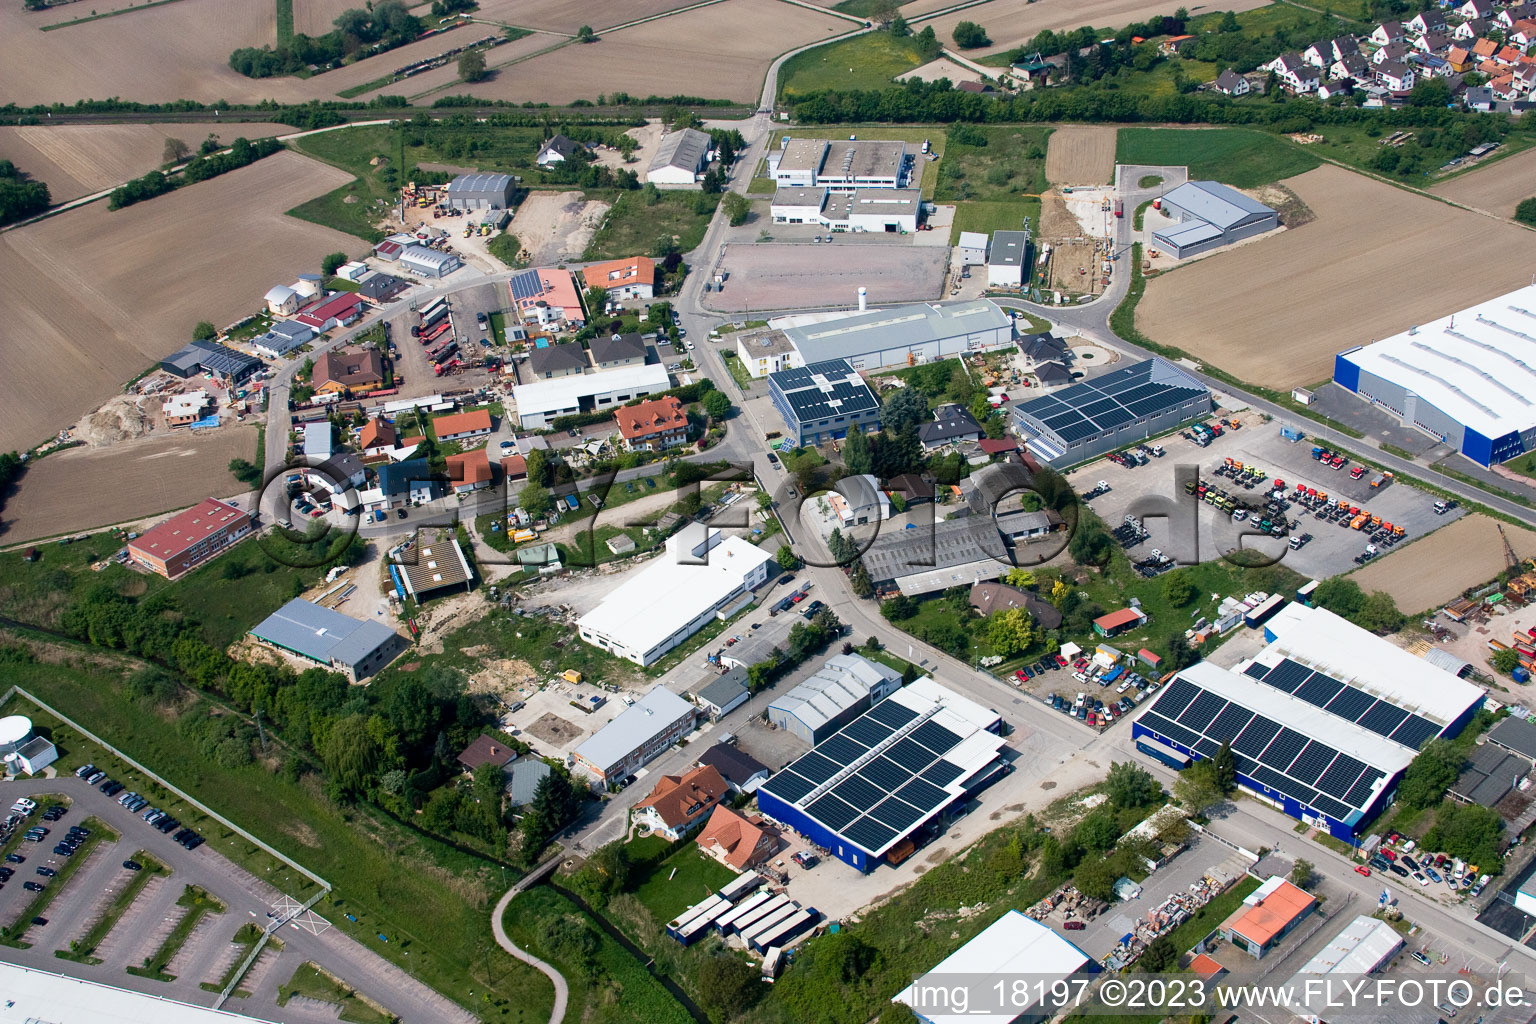 Industrial area in Hagenbach in the state Rhineland-Palatinate, Germany from the plane